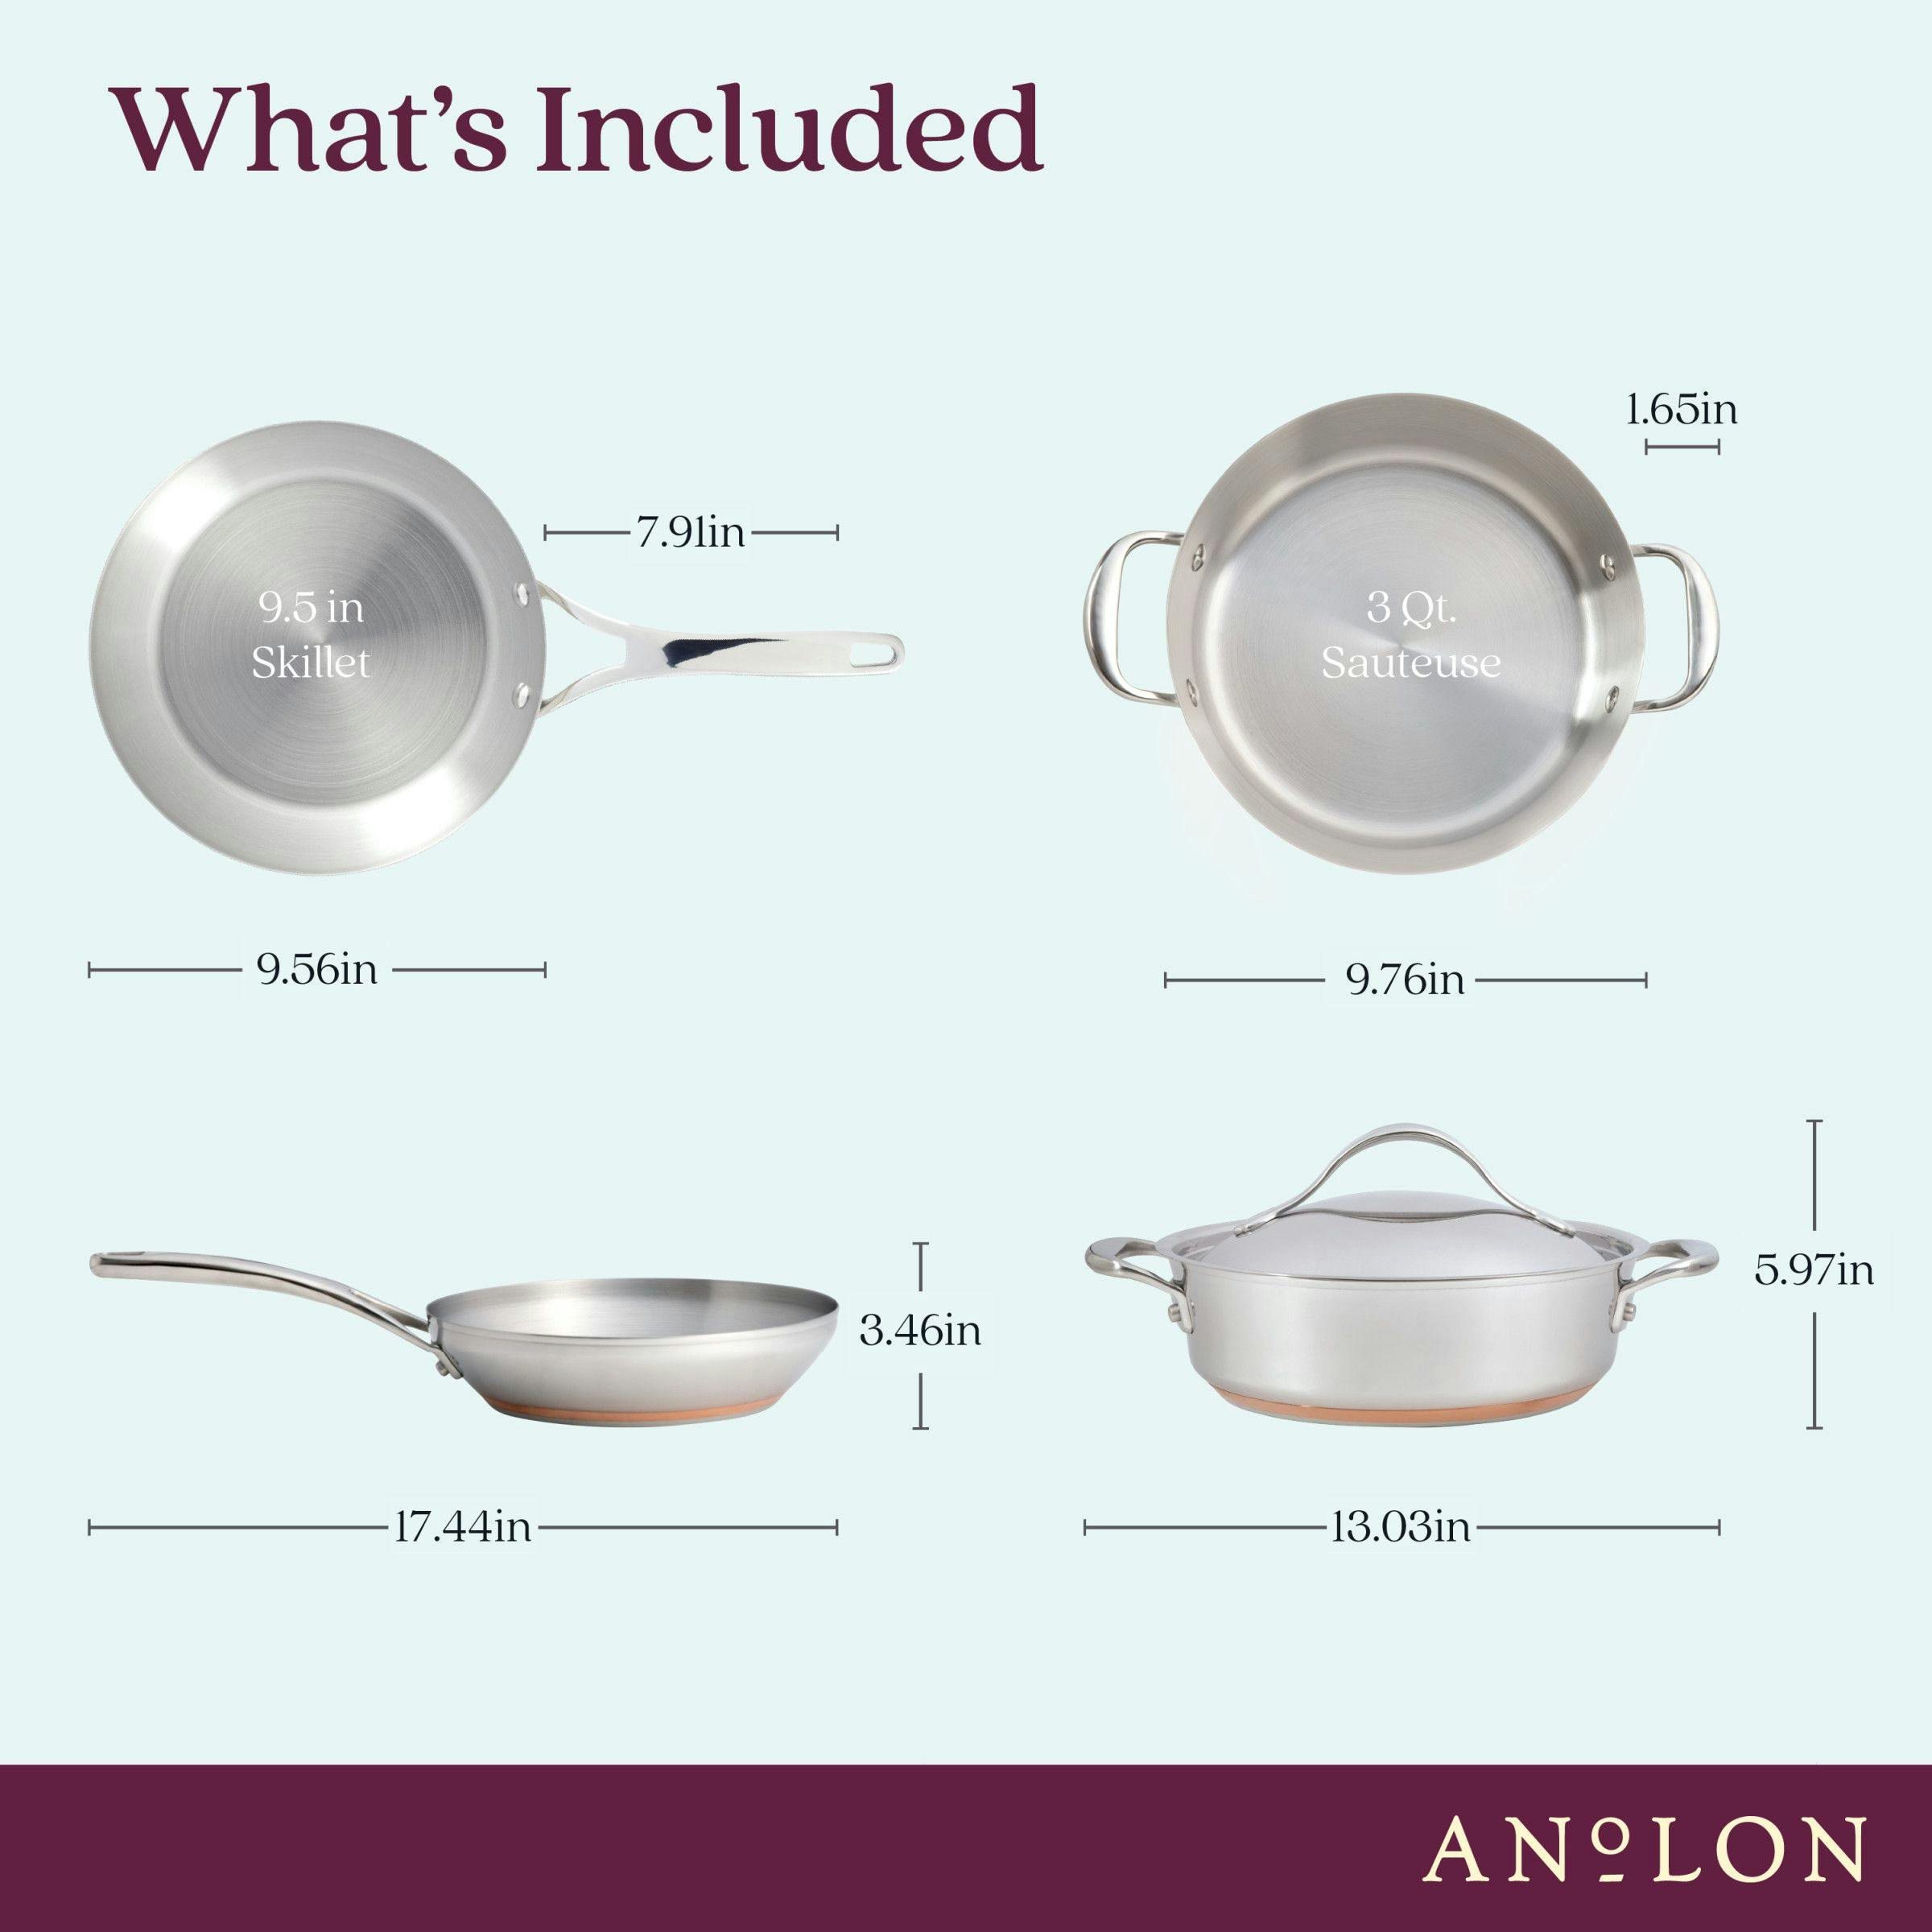 Anolon Nouvelle Copper Stainless Steel Sauteuse and Frying Pan Set, 3-Piece, Silver